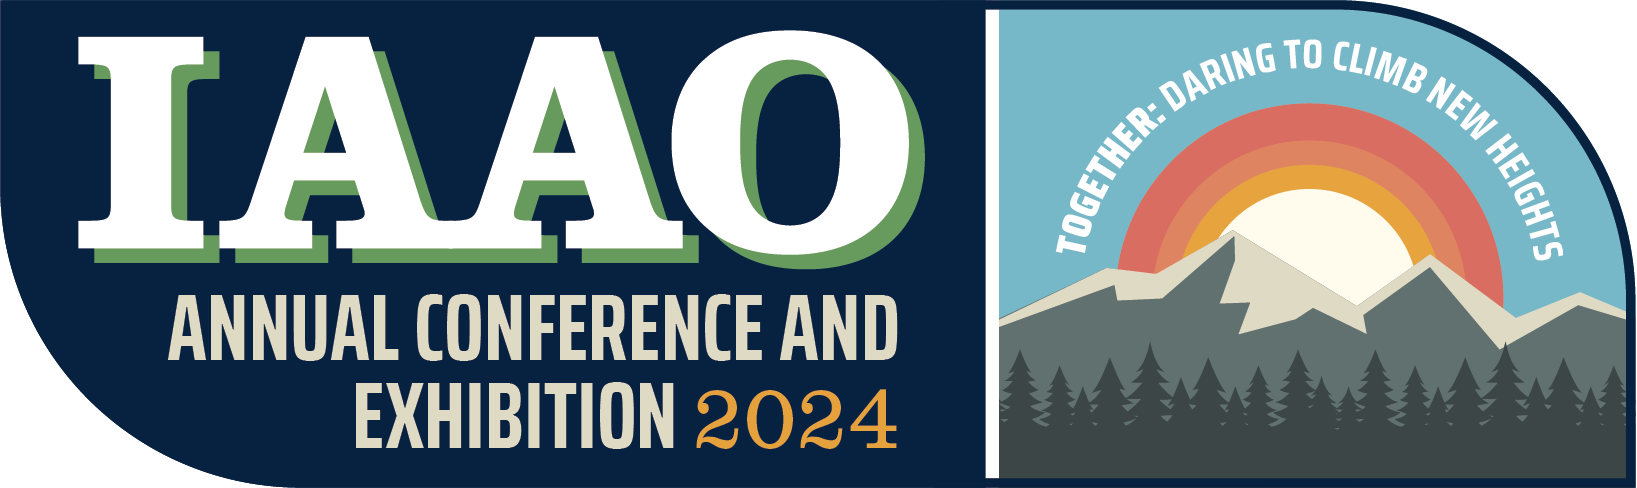 IAAO Annual Conference 2024